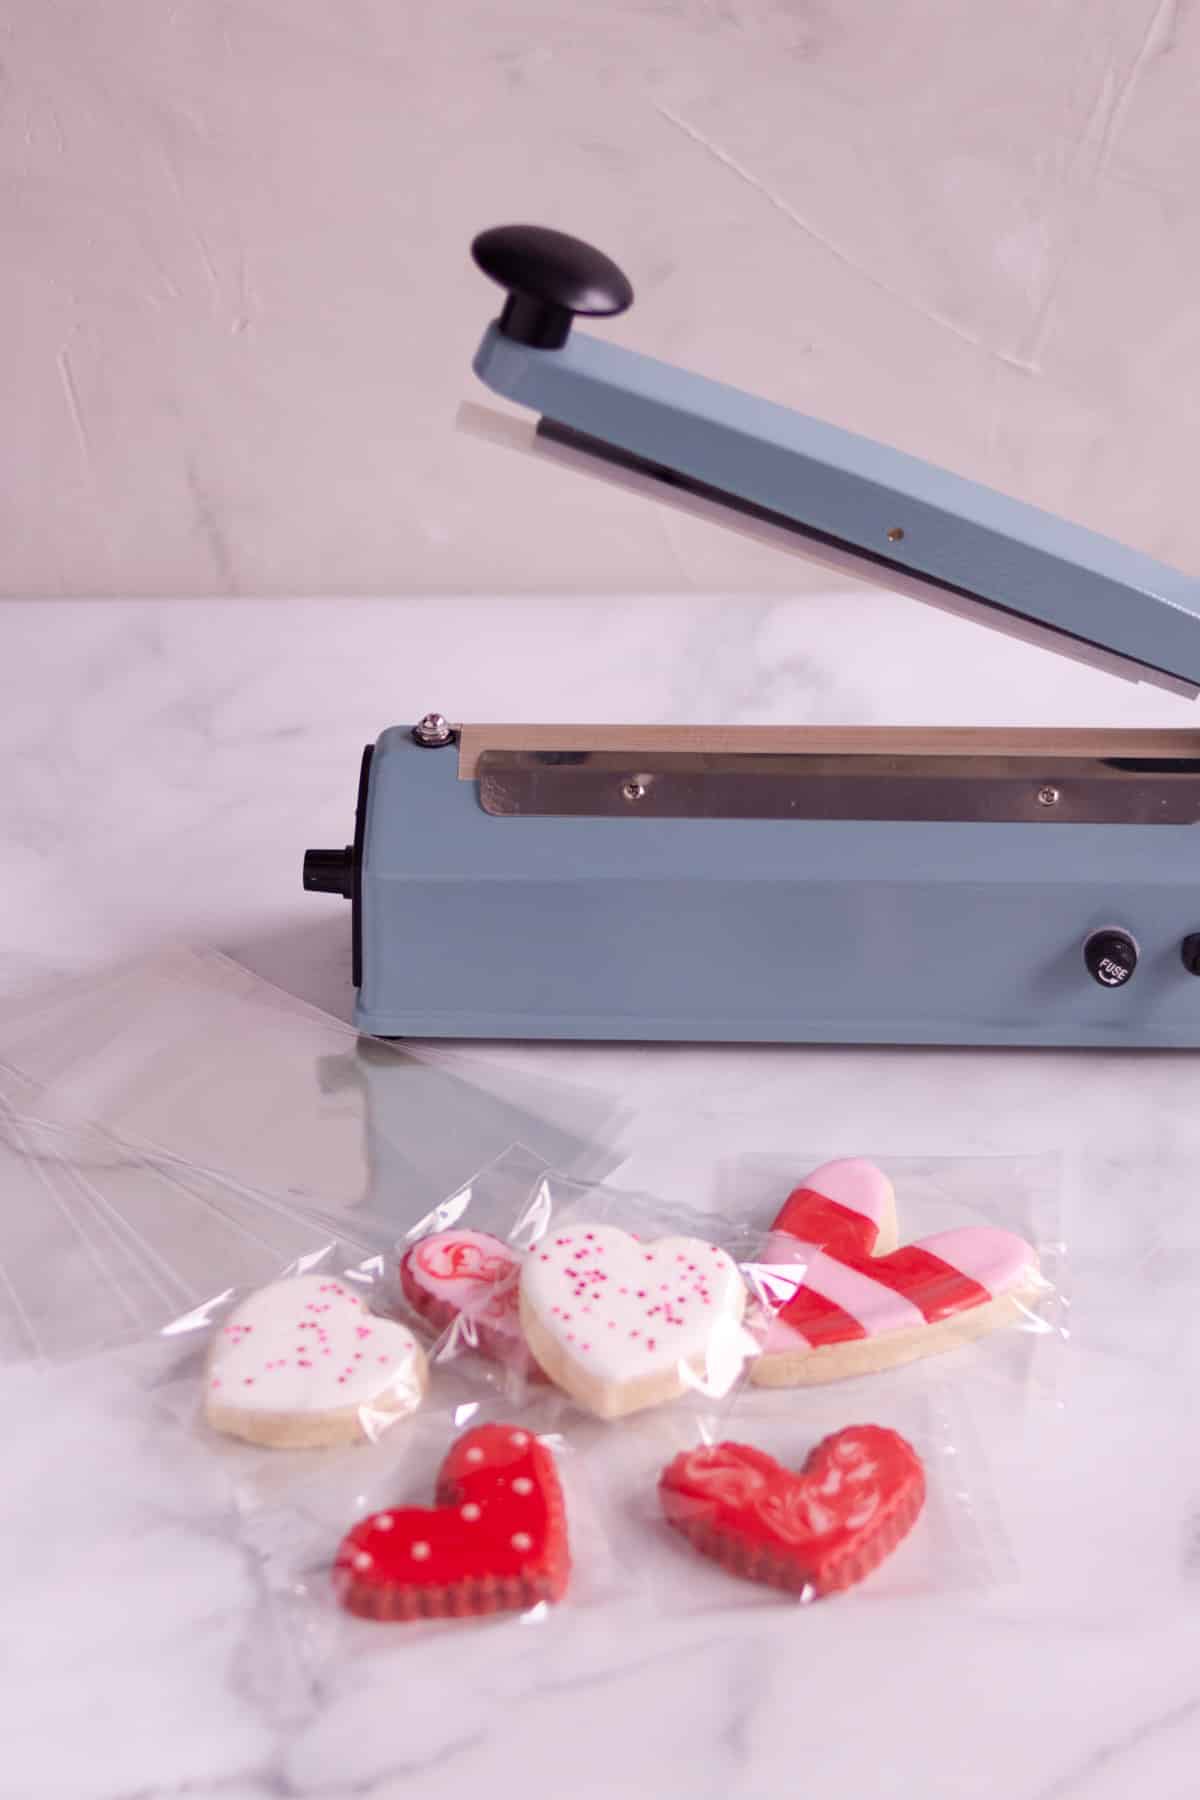 Heat sealer with bags and sealed cookies. 